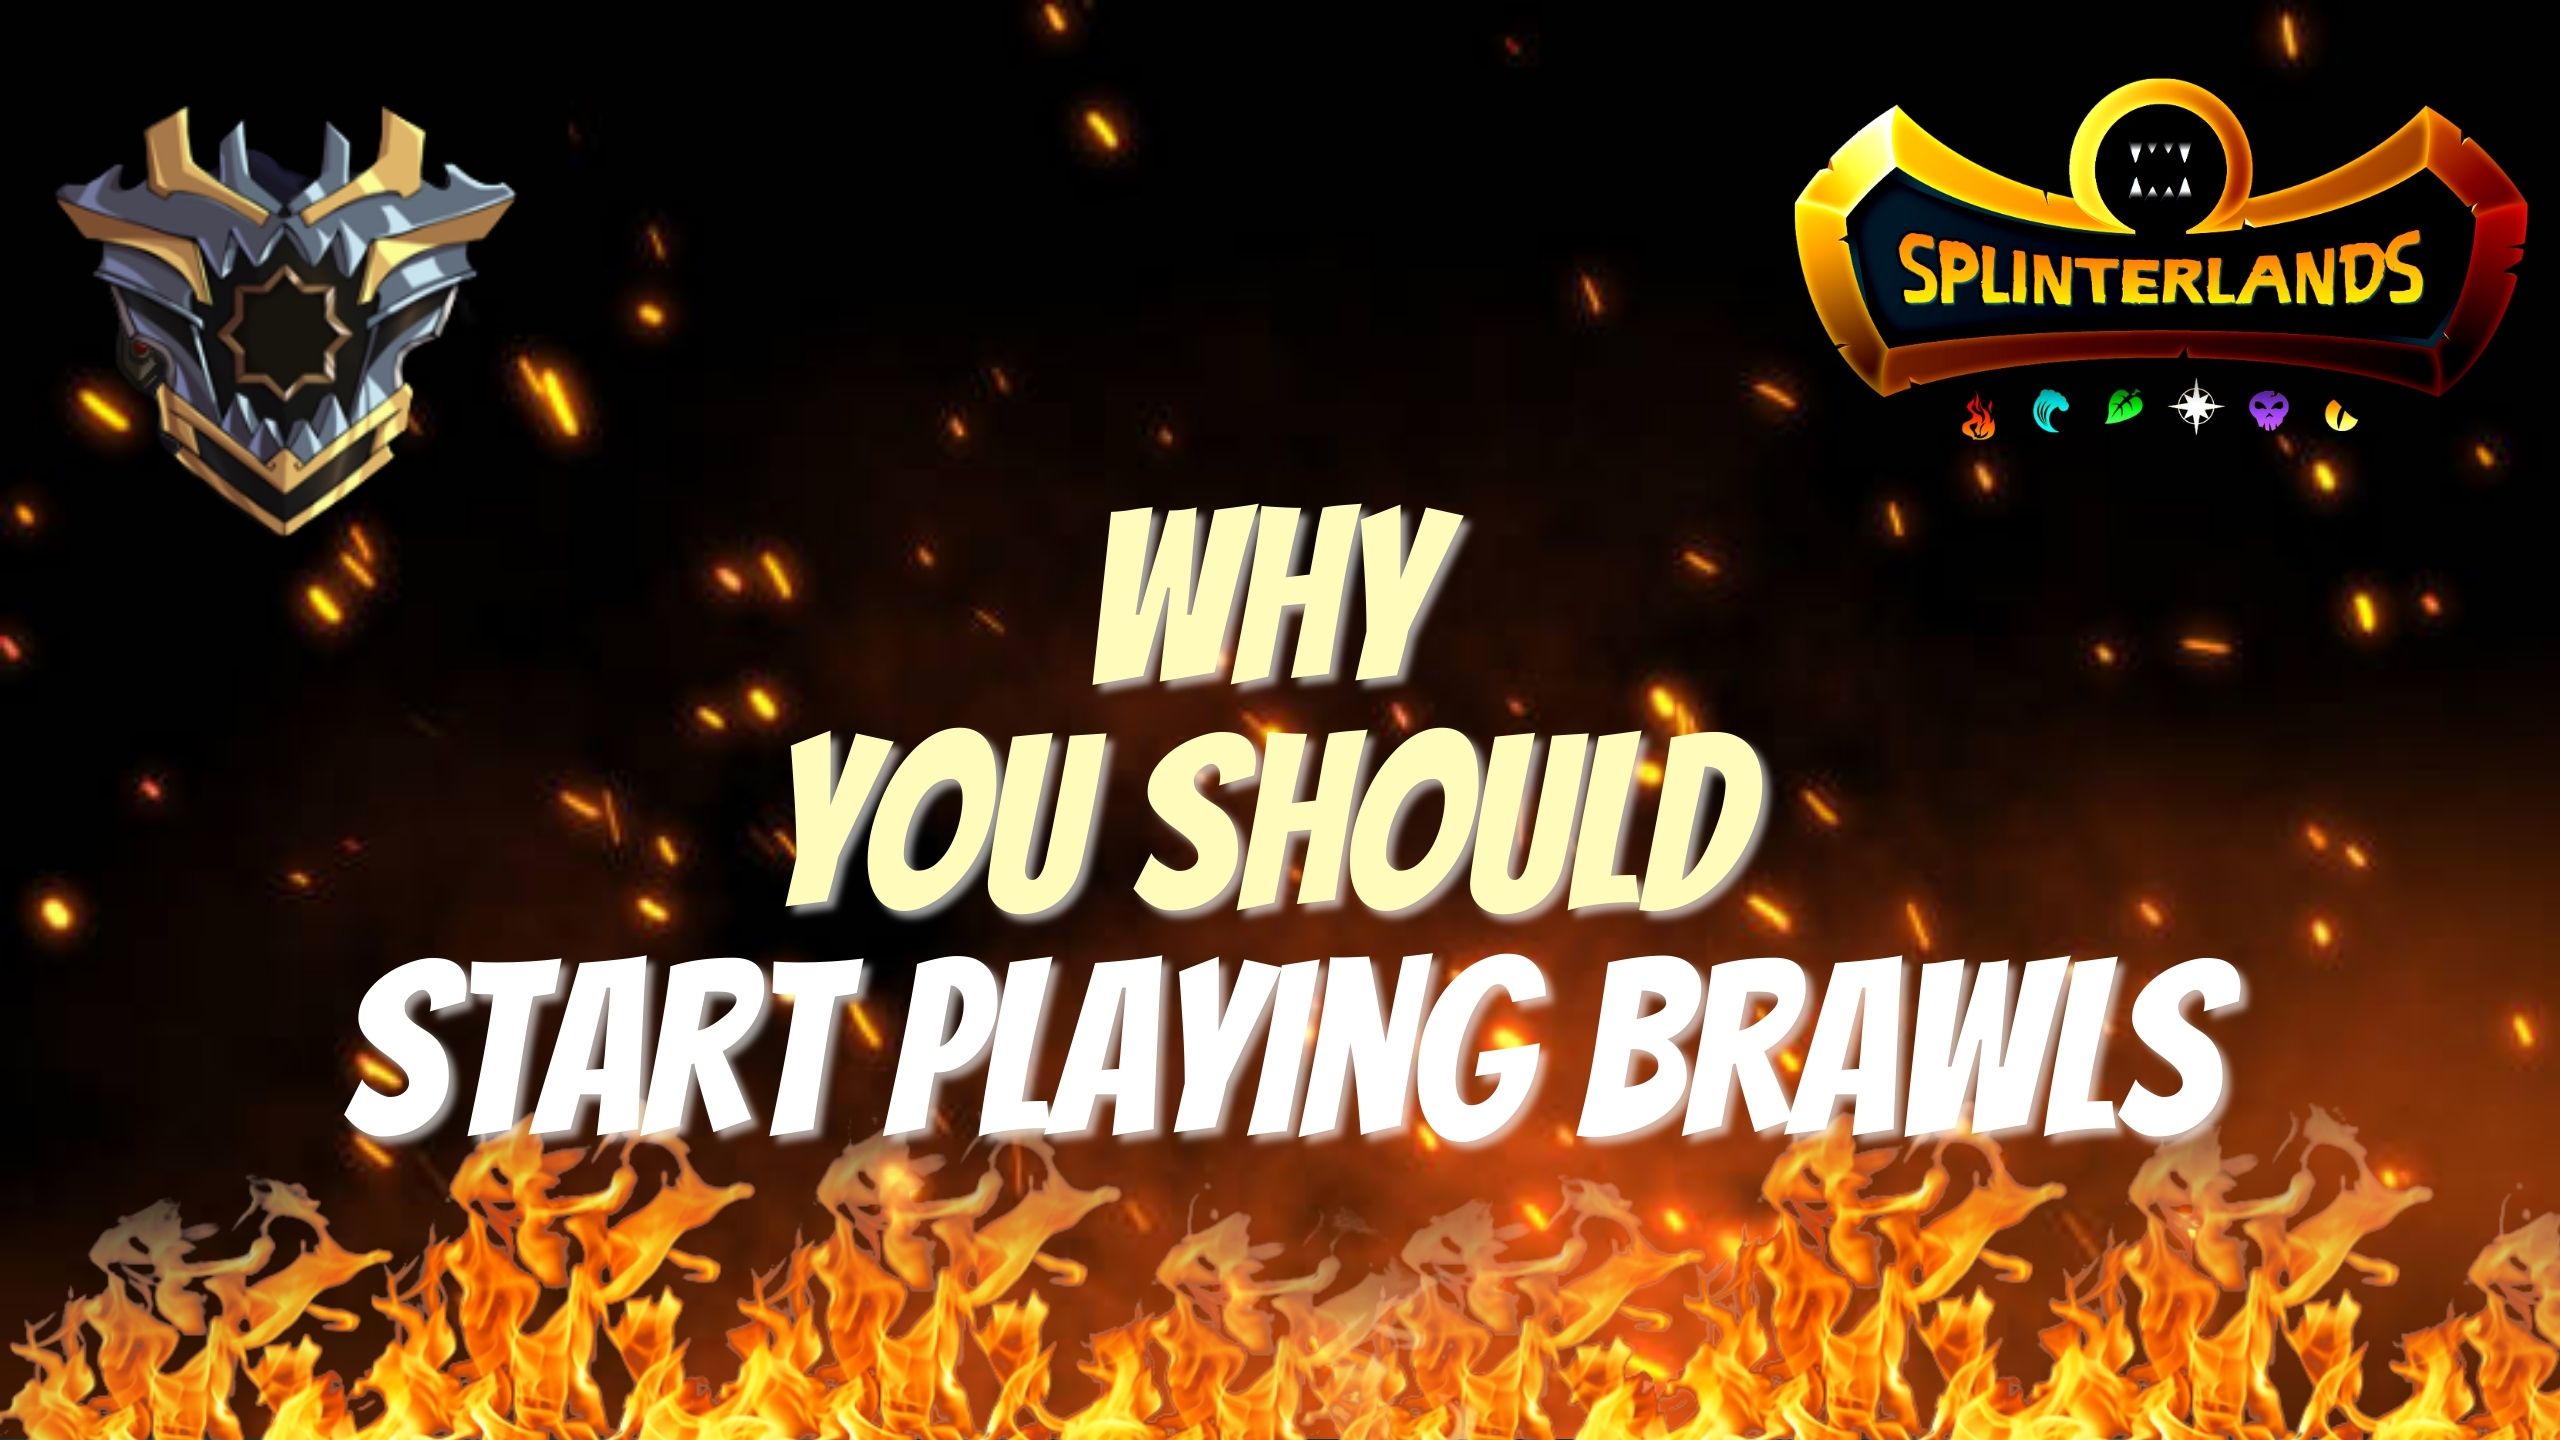 @mango-juice/why-you-should-start-playing-splinterlands-brawls-right-now